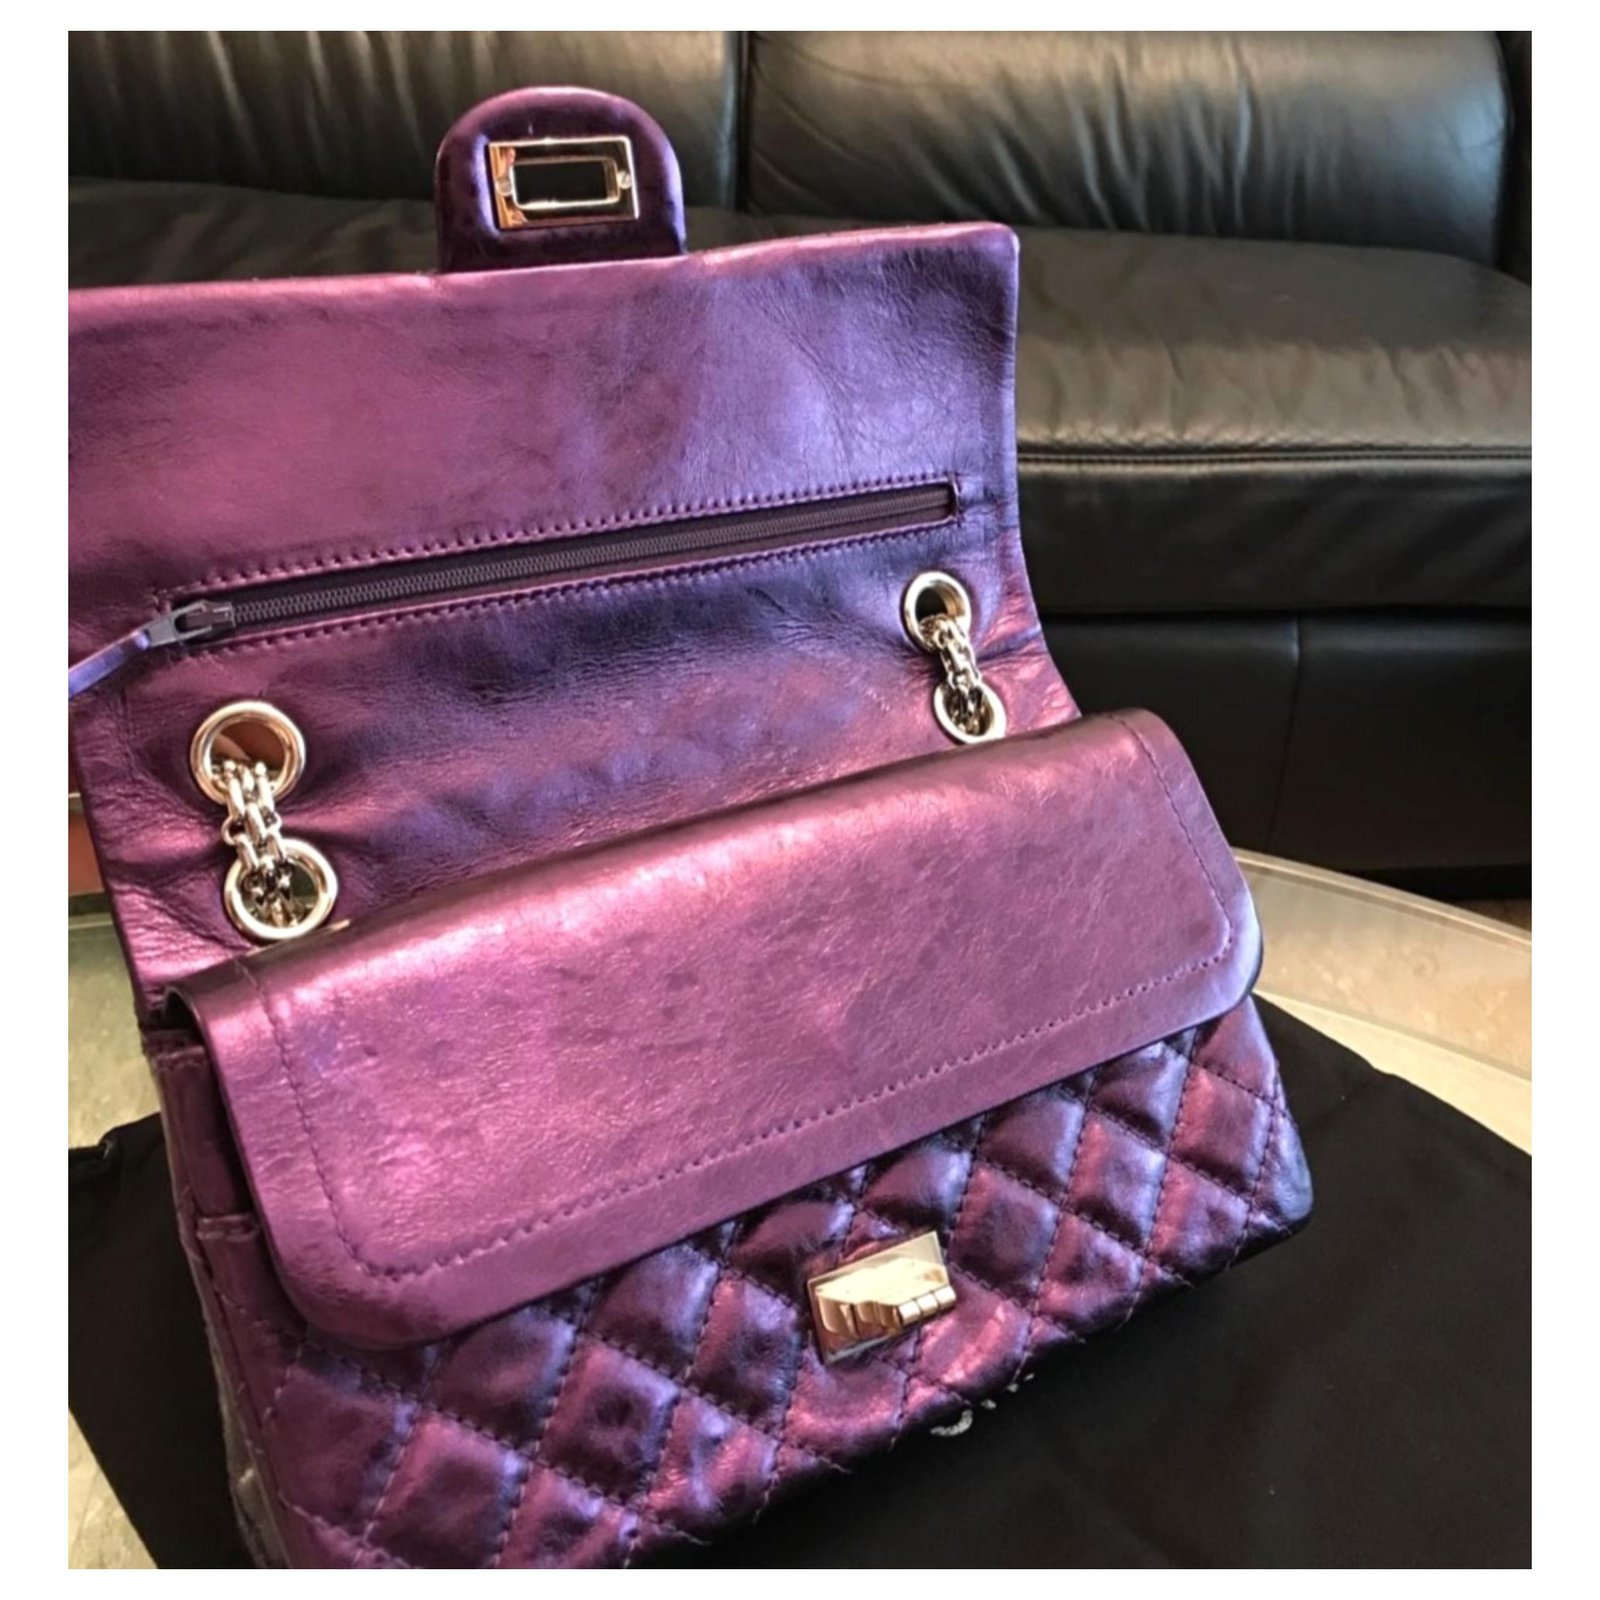 ÉPROUVÉE Preowned Luxury Fashion - Chanel Reissue Lambskin Pouch